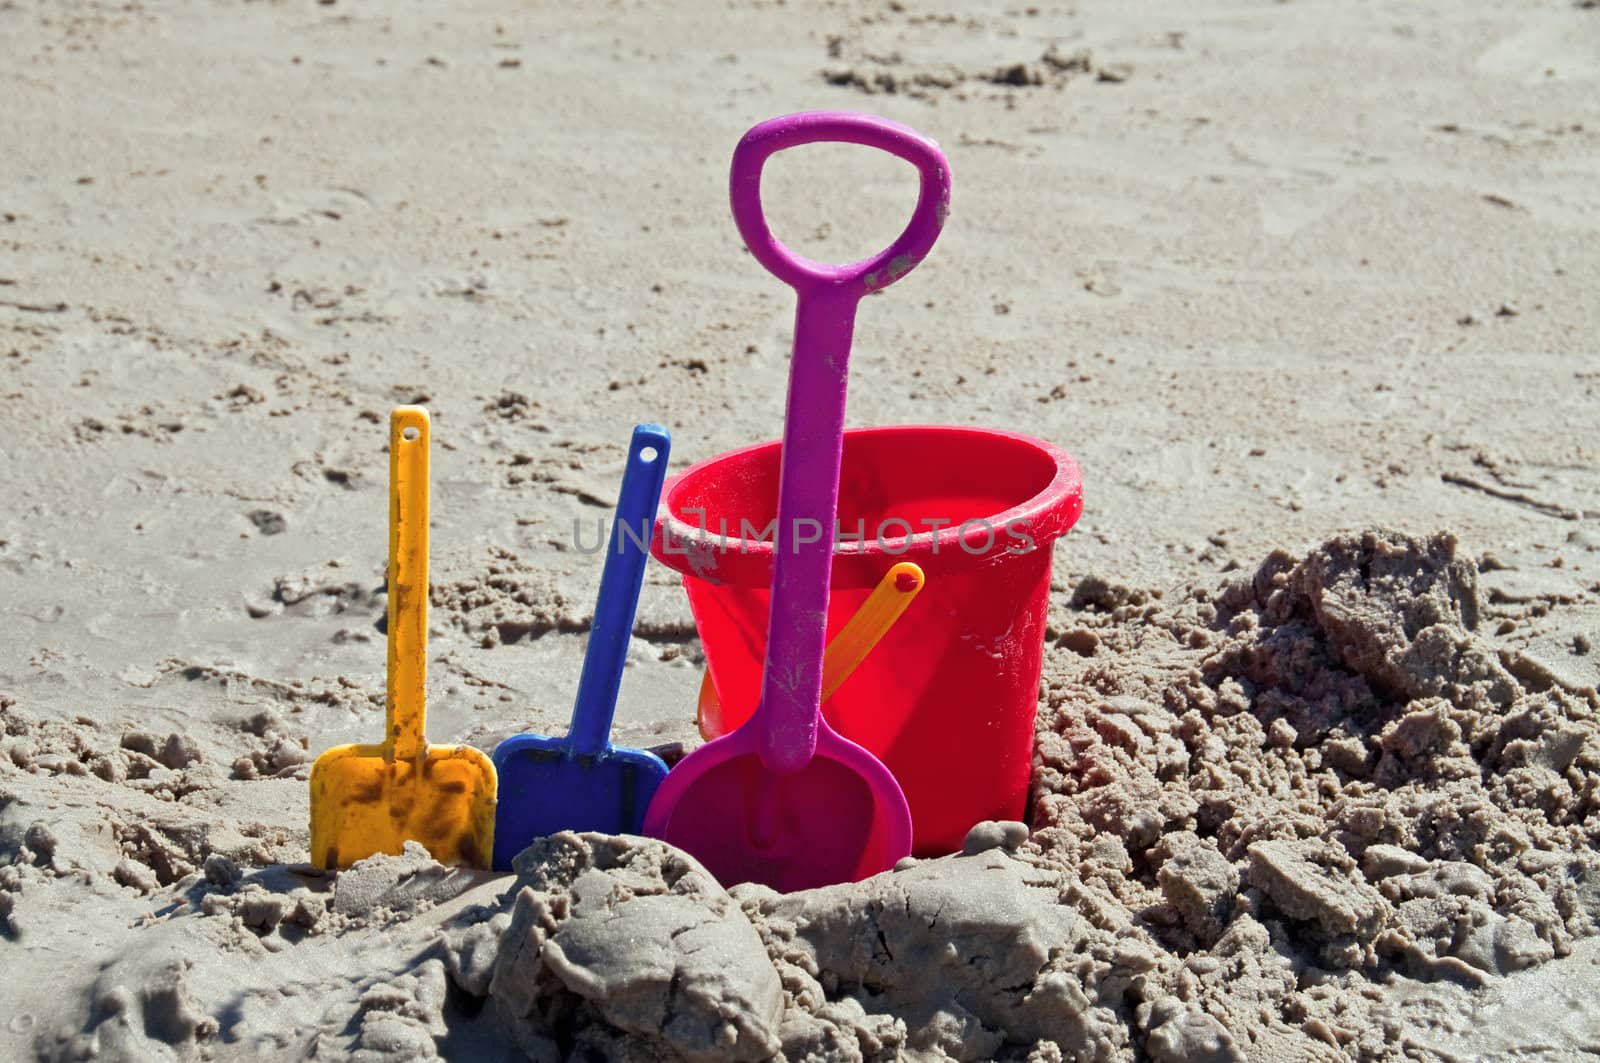 Toy shovels and bucket in use on a beach